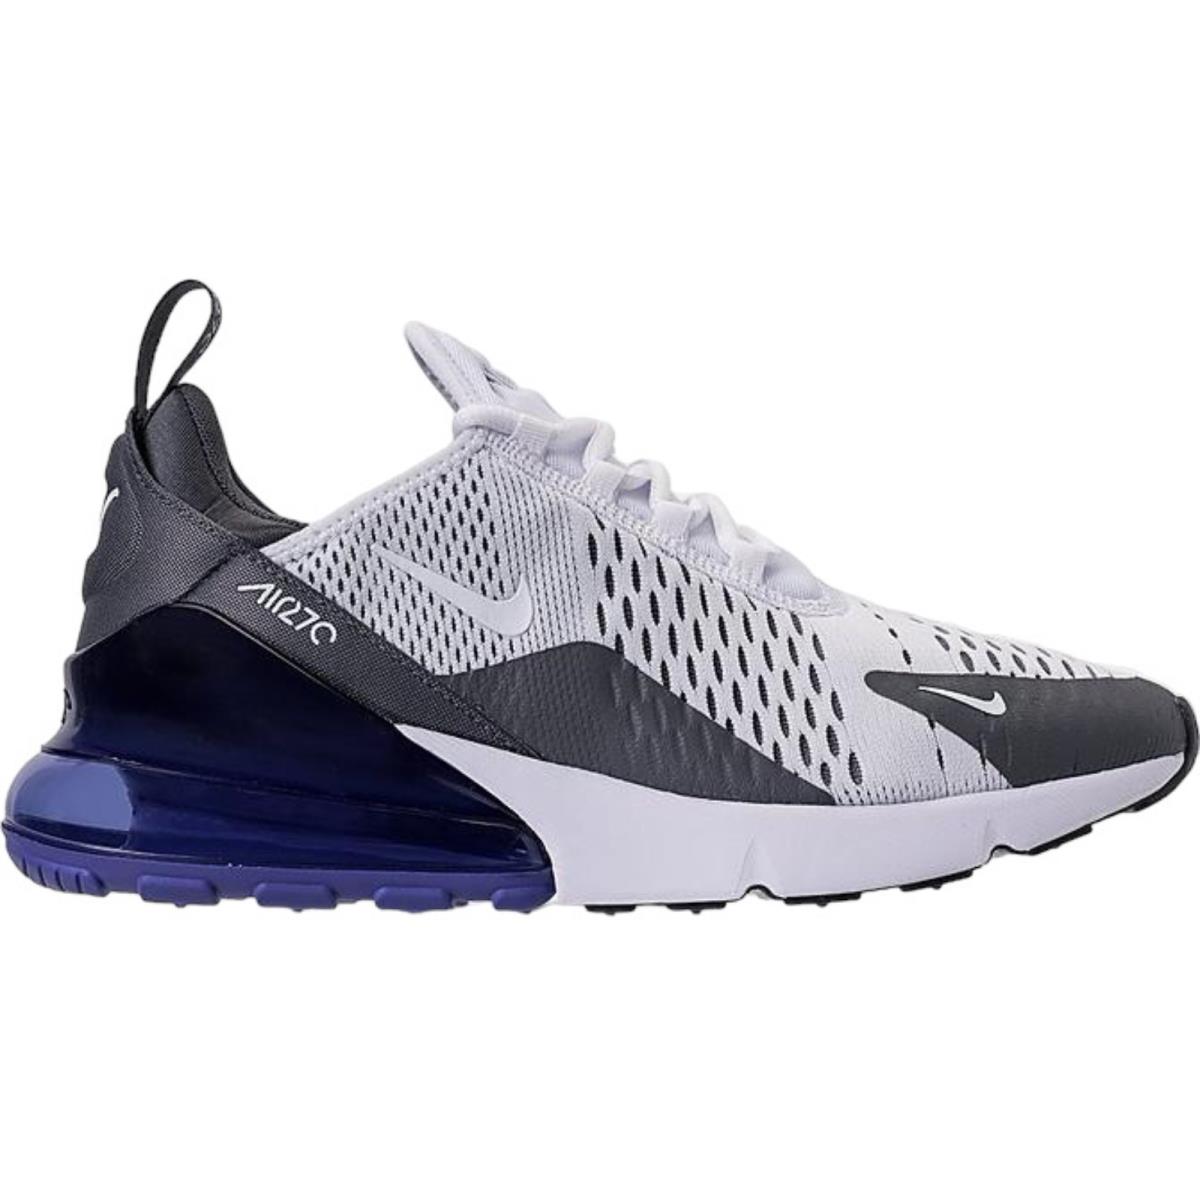 Nike Air Max 270 Men`s Casual Shoes All Colors US Sizes 7-14 White/Persian Violet/Dark Grey